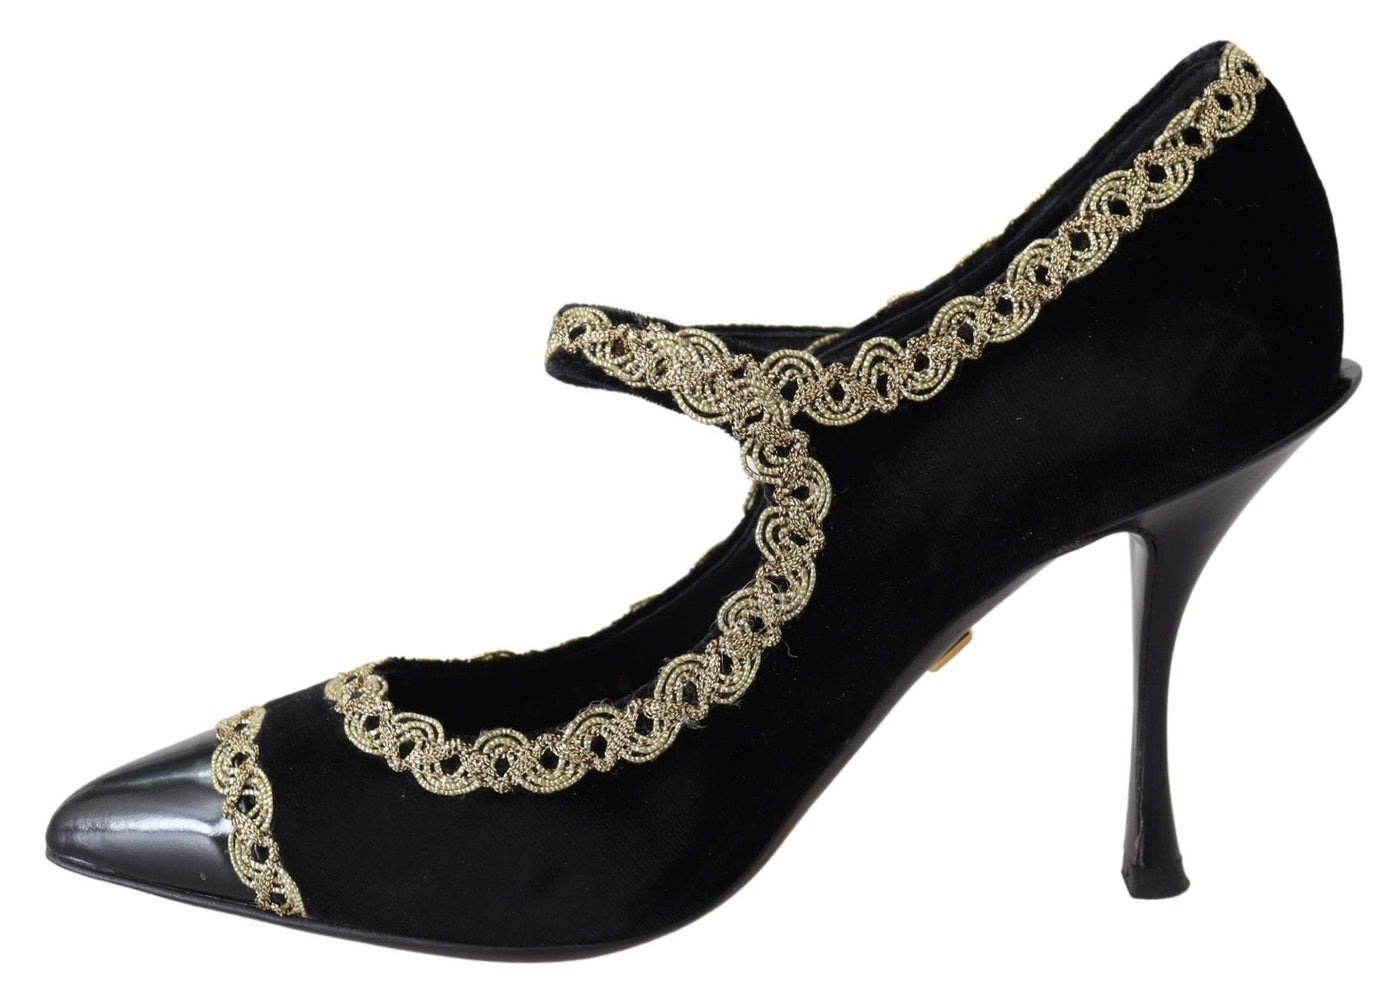 Dolce & Gabbana Black Velvet Gold Mary Janes Pumps #women, Black, Dolce & Gabbana, EU35/US4.5, feed-agegroup-adult, feed-color-Black, feed-gender-female, Pumps - Women - Shoes, Shoes - New Arrivals at SEYMAYKA